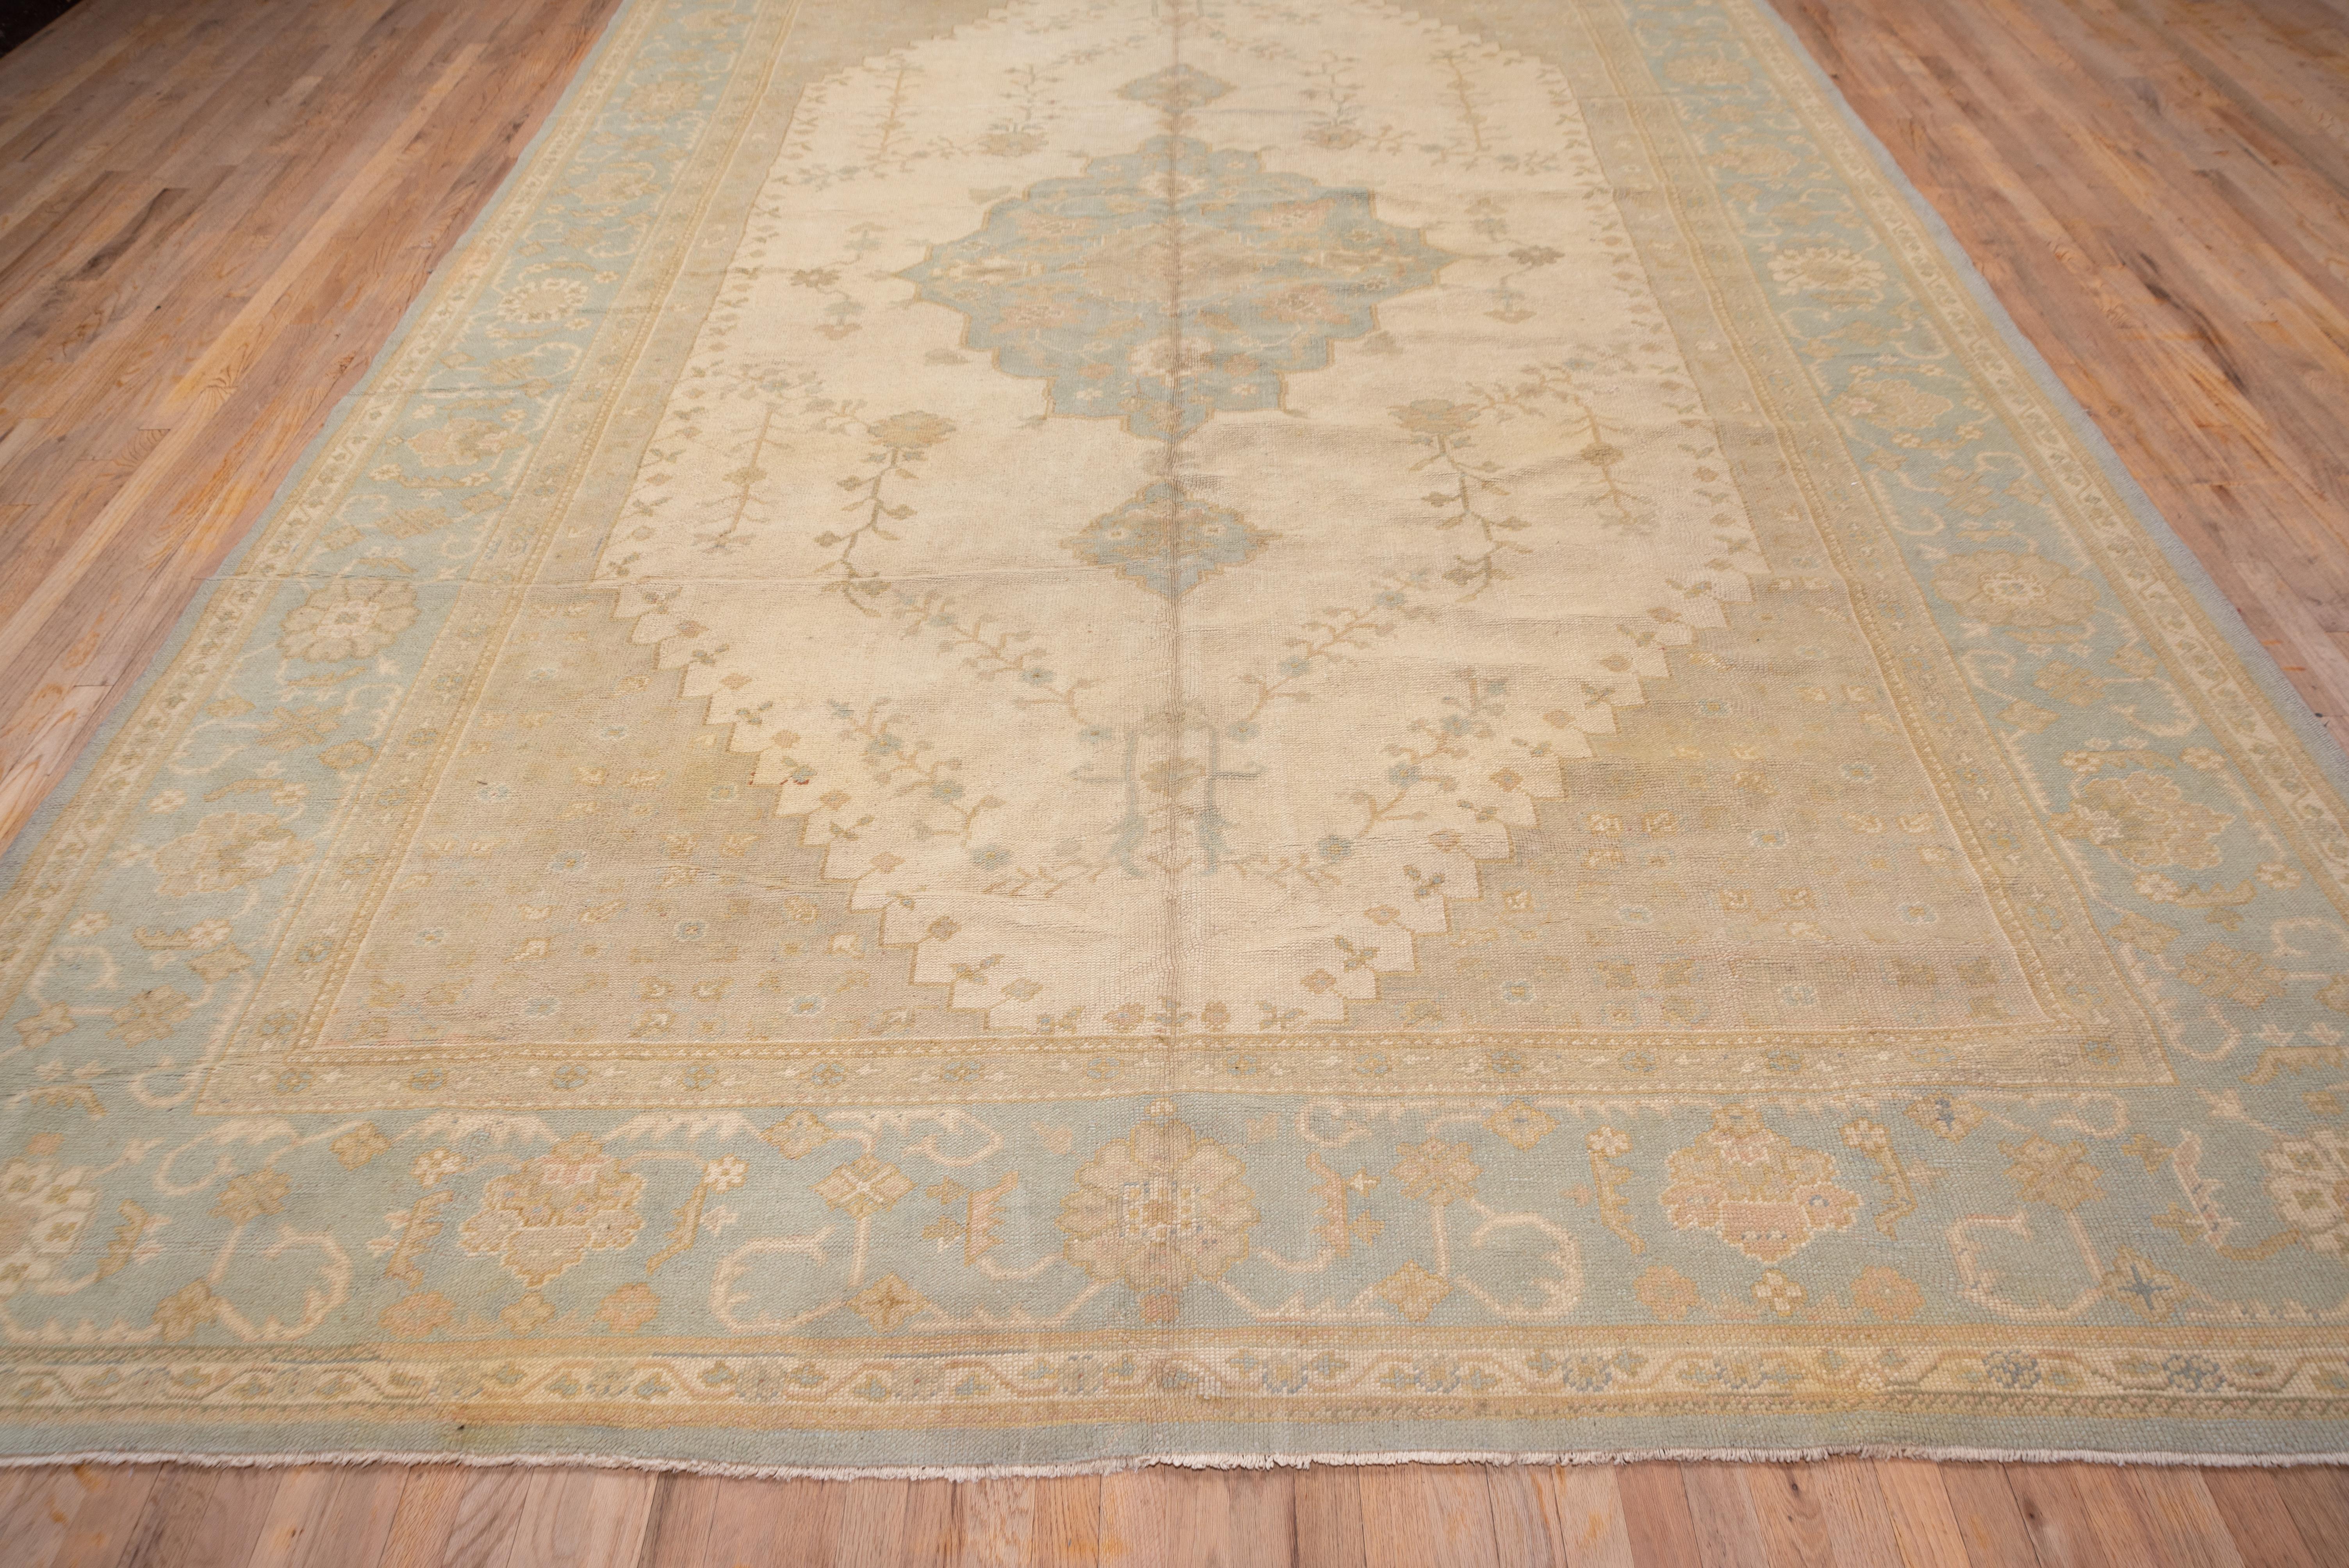 This west Anatolian town carpet is a subdued study in ivory, and very pale green. The cream subfield is edged with small flowers and centres a lobed, pendanted and pointed medallion. The palest green border displays corner rosettes, palmettes and